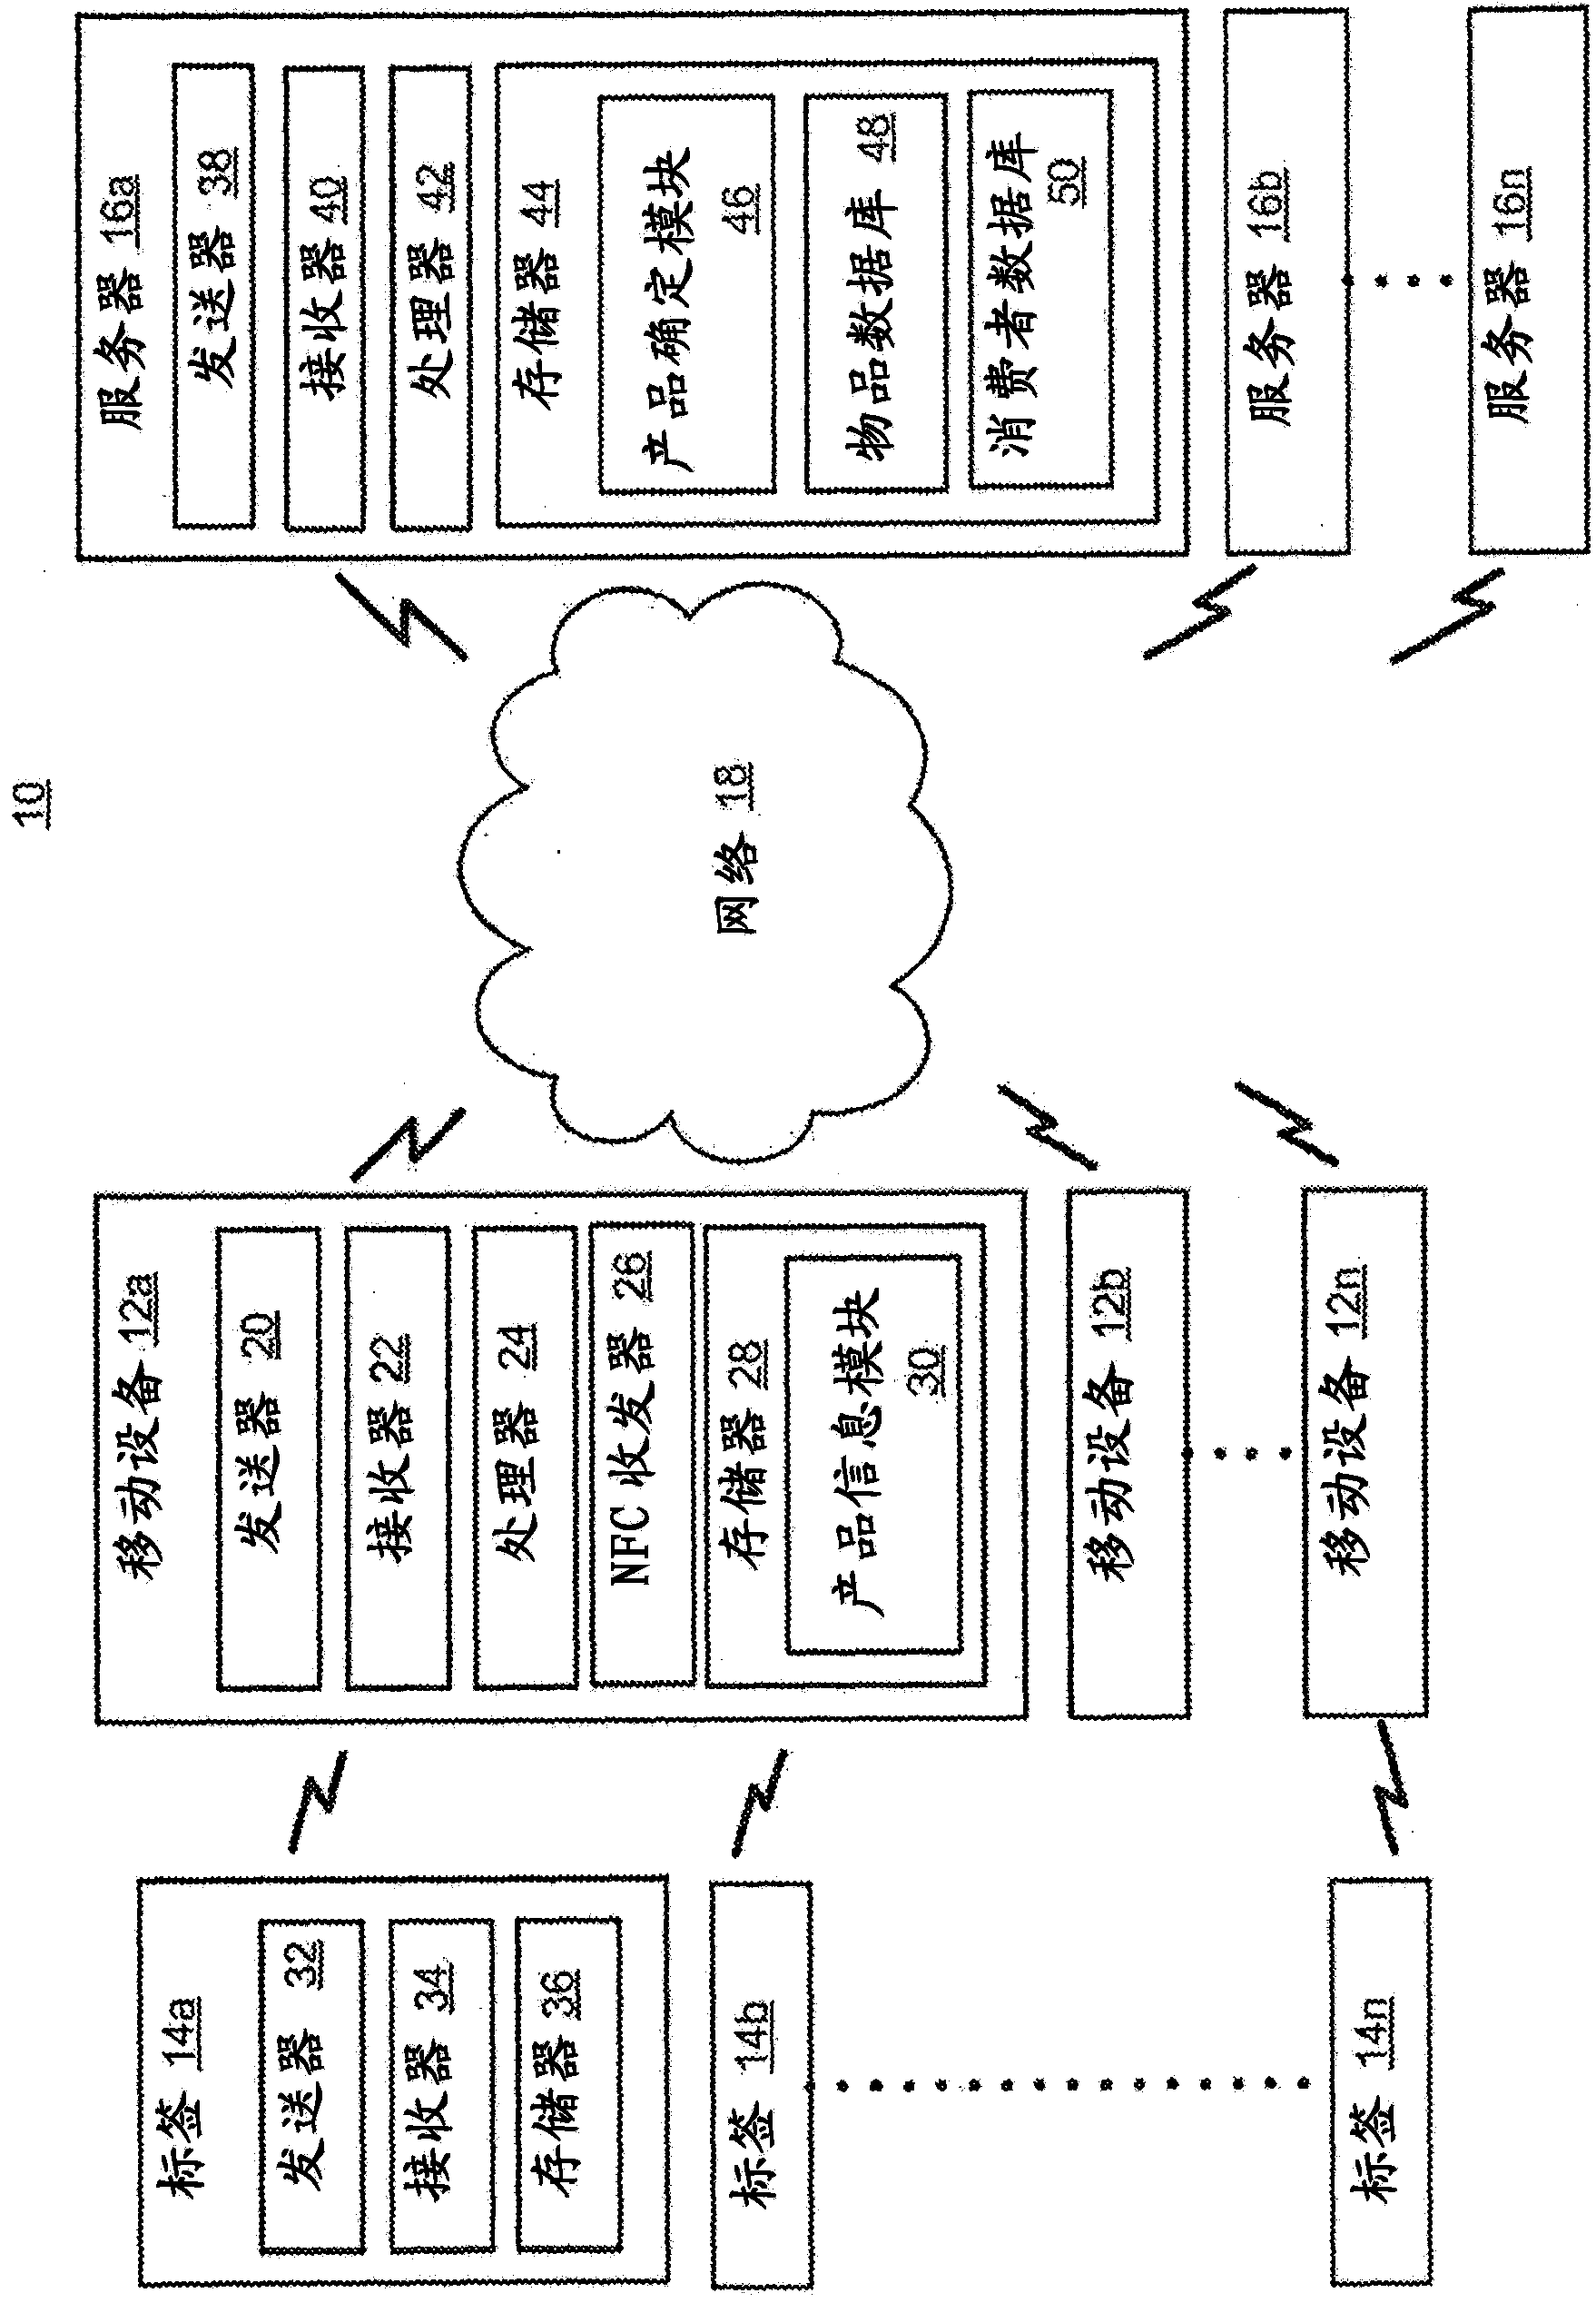 Product information system and method using a tag and mobile device